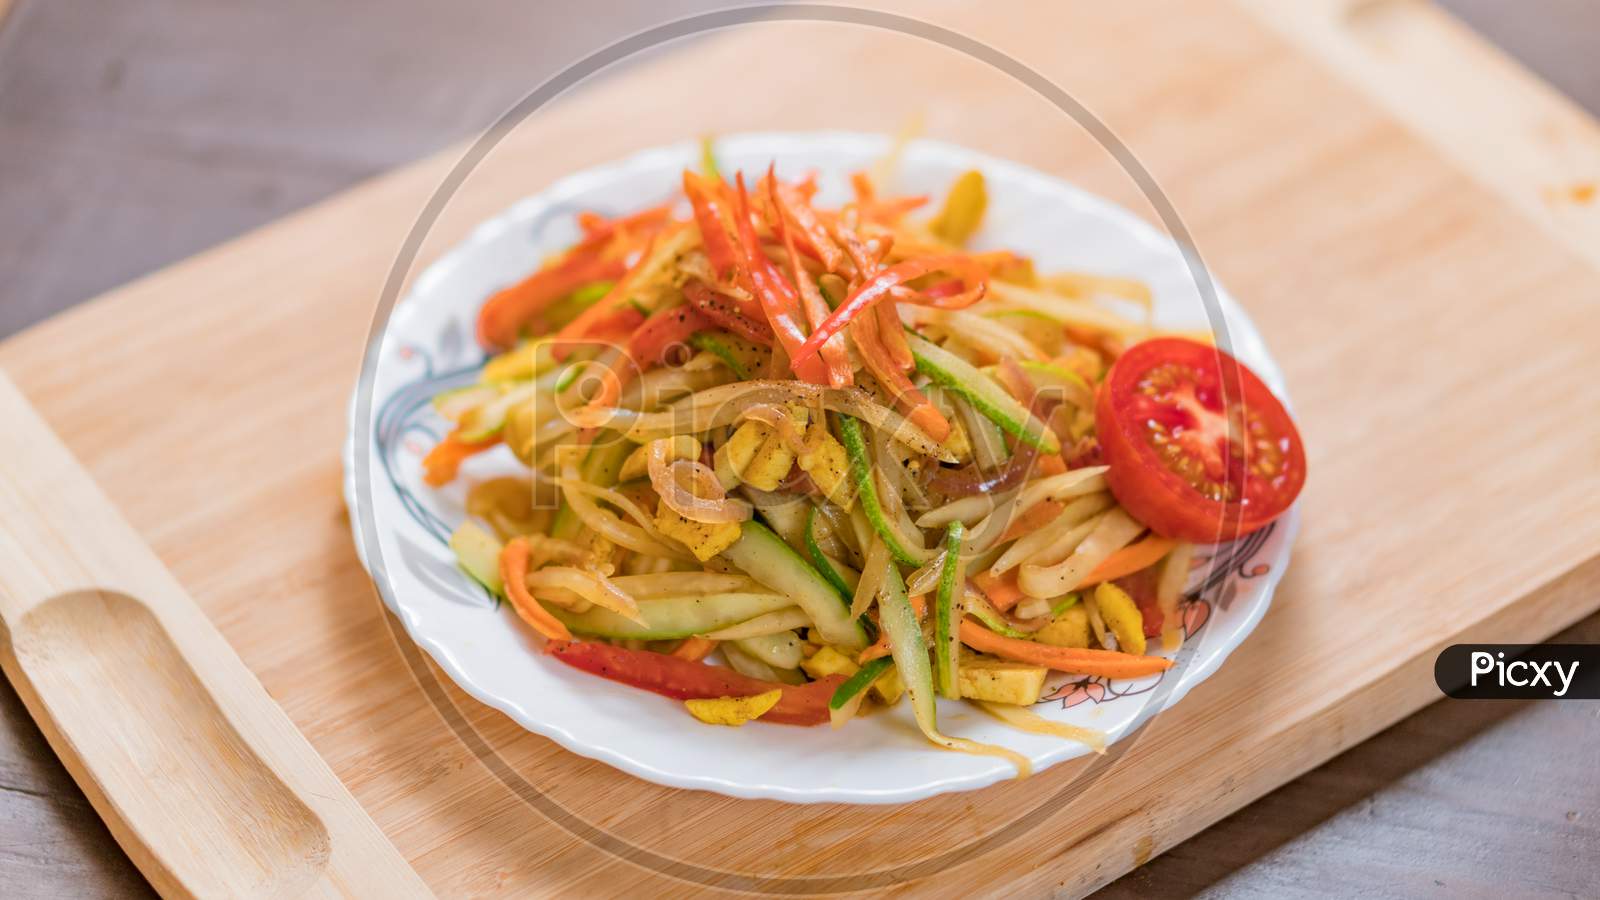 green raw papaya salad, great digestive recipe for health conscious and digestive patients.